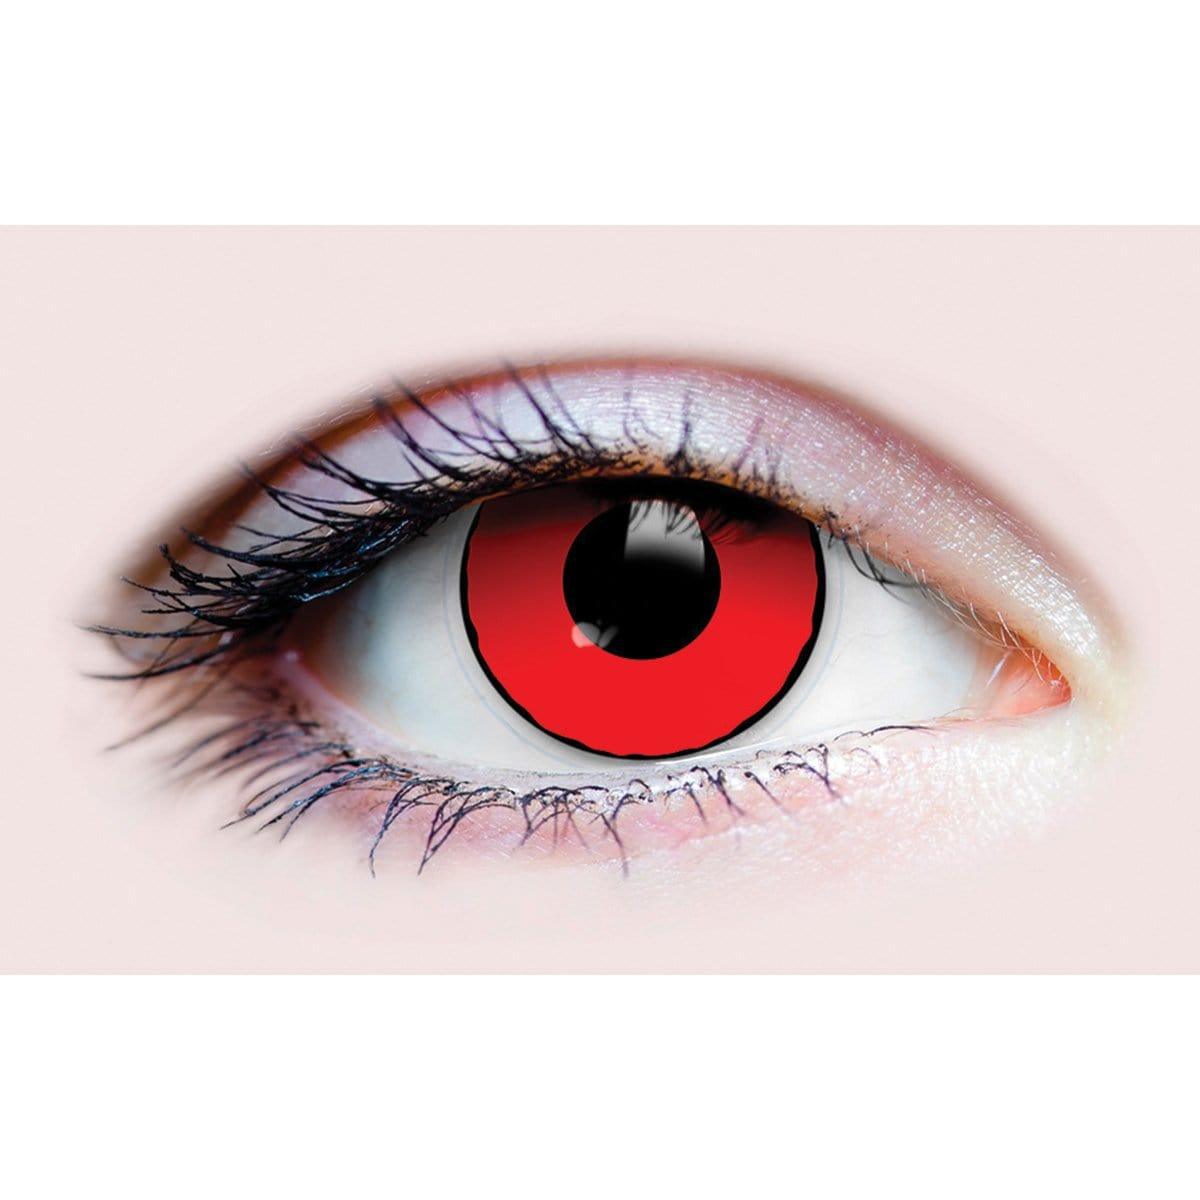 Buy Costume Accessories Blood eyes contact lenses, 3 months usage sold at Party Expert